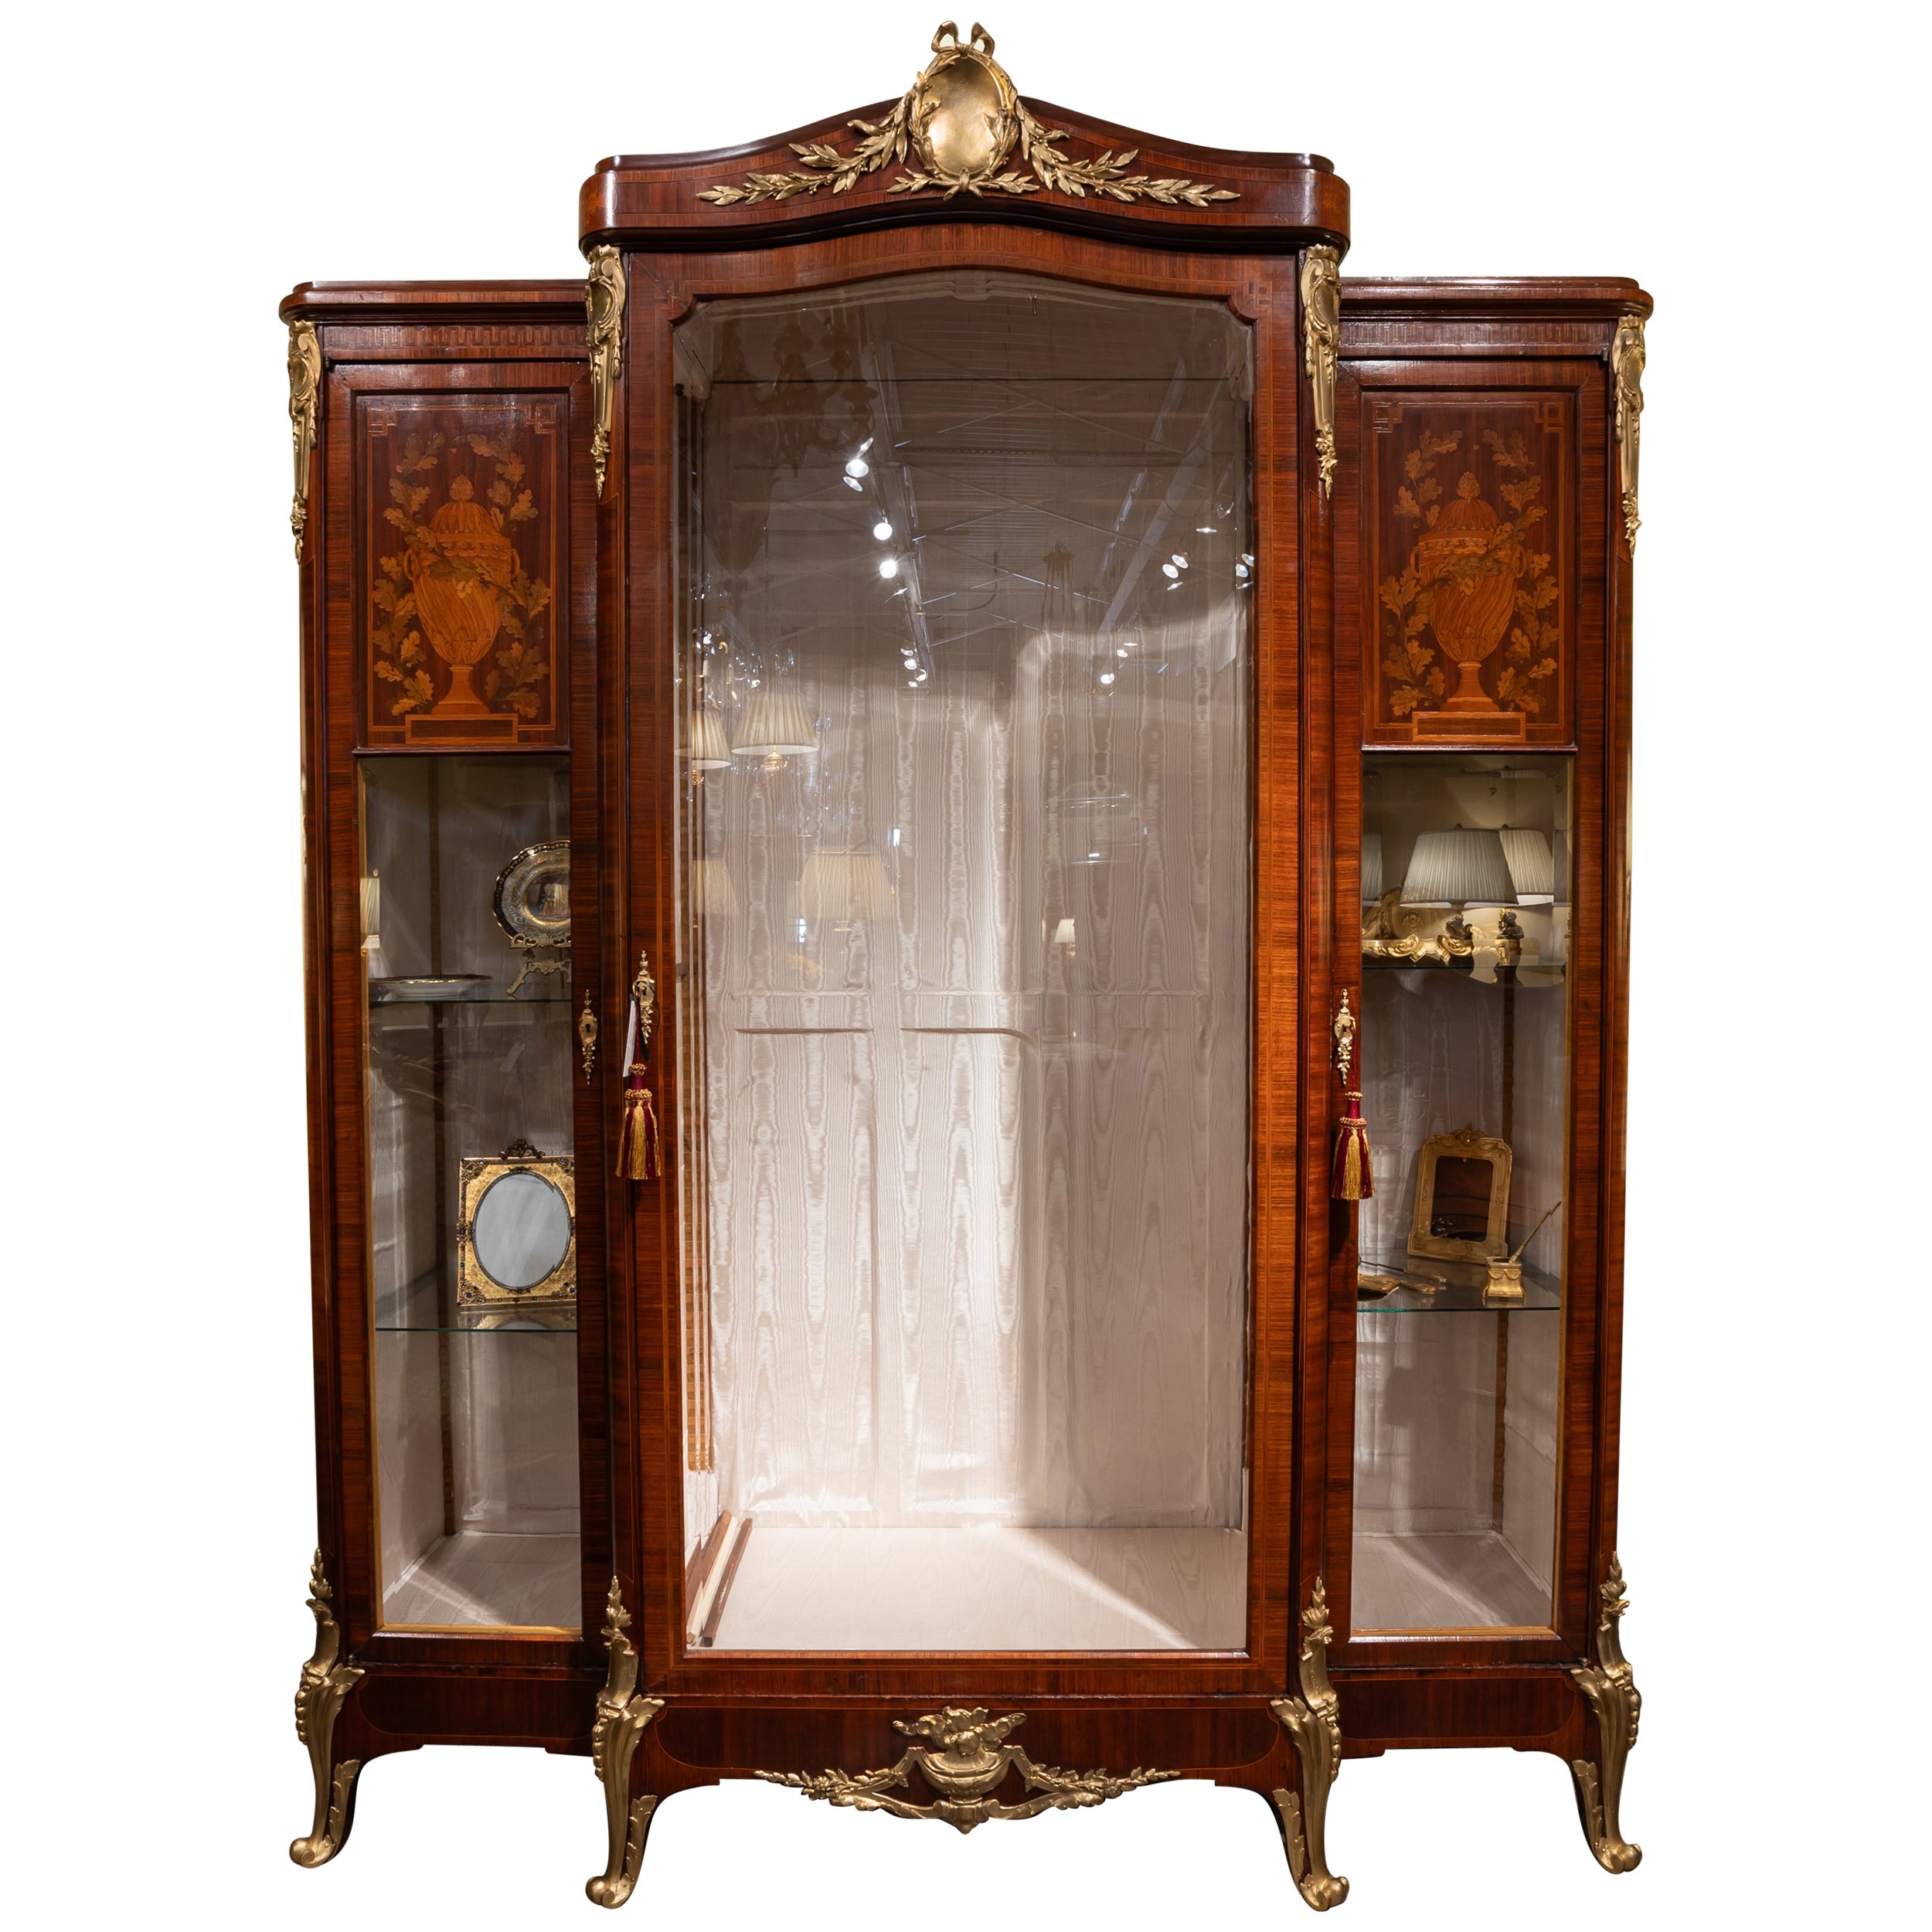 A fine 19th c French Louis XVI marquetry and kingwood viewing cabinet . 